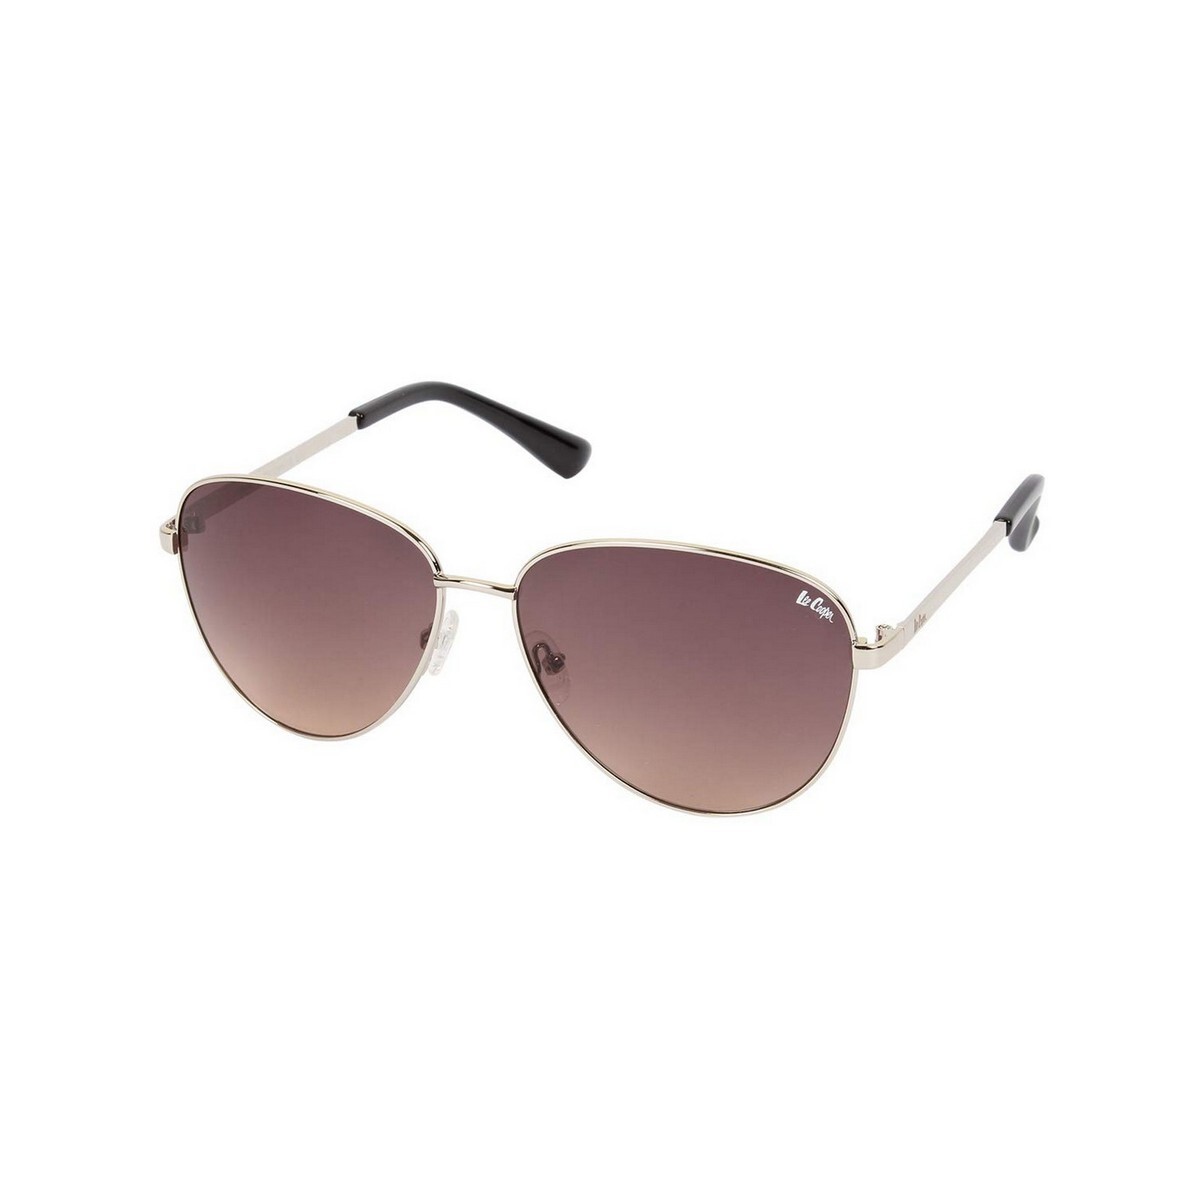 Lee Cooper Female Silver Frame With Pink Lens Sunglass